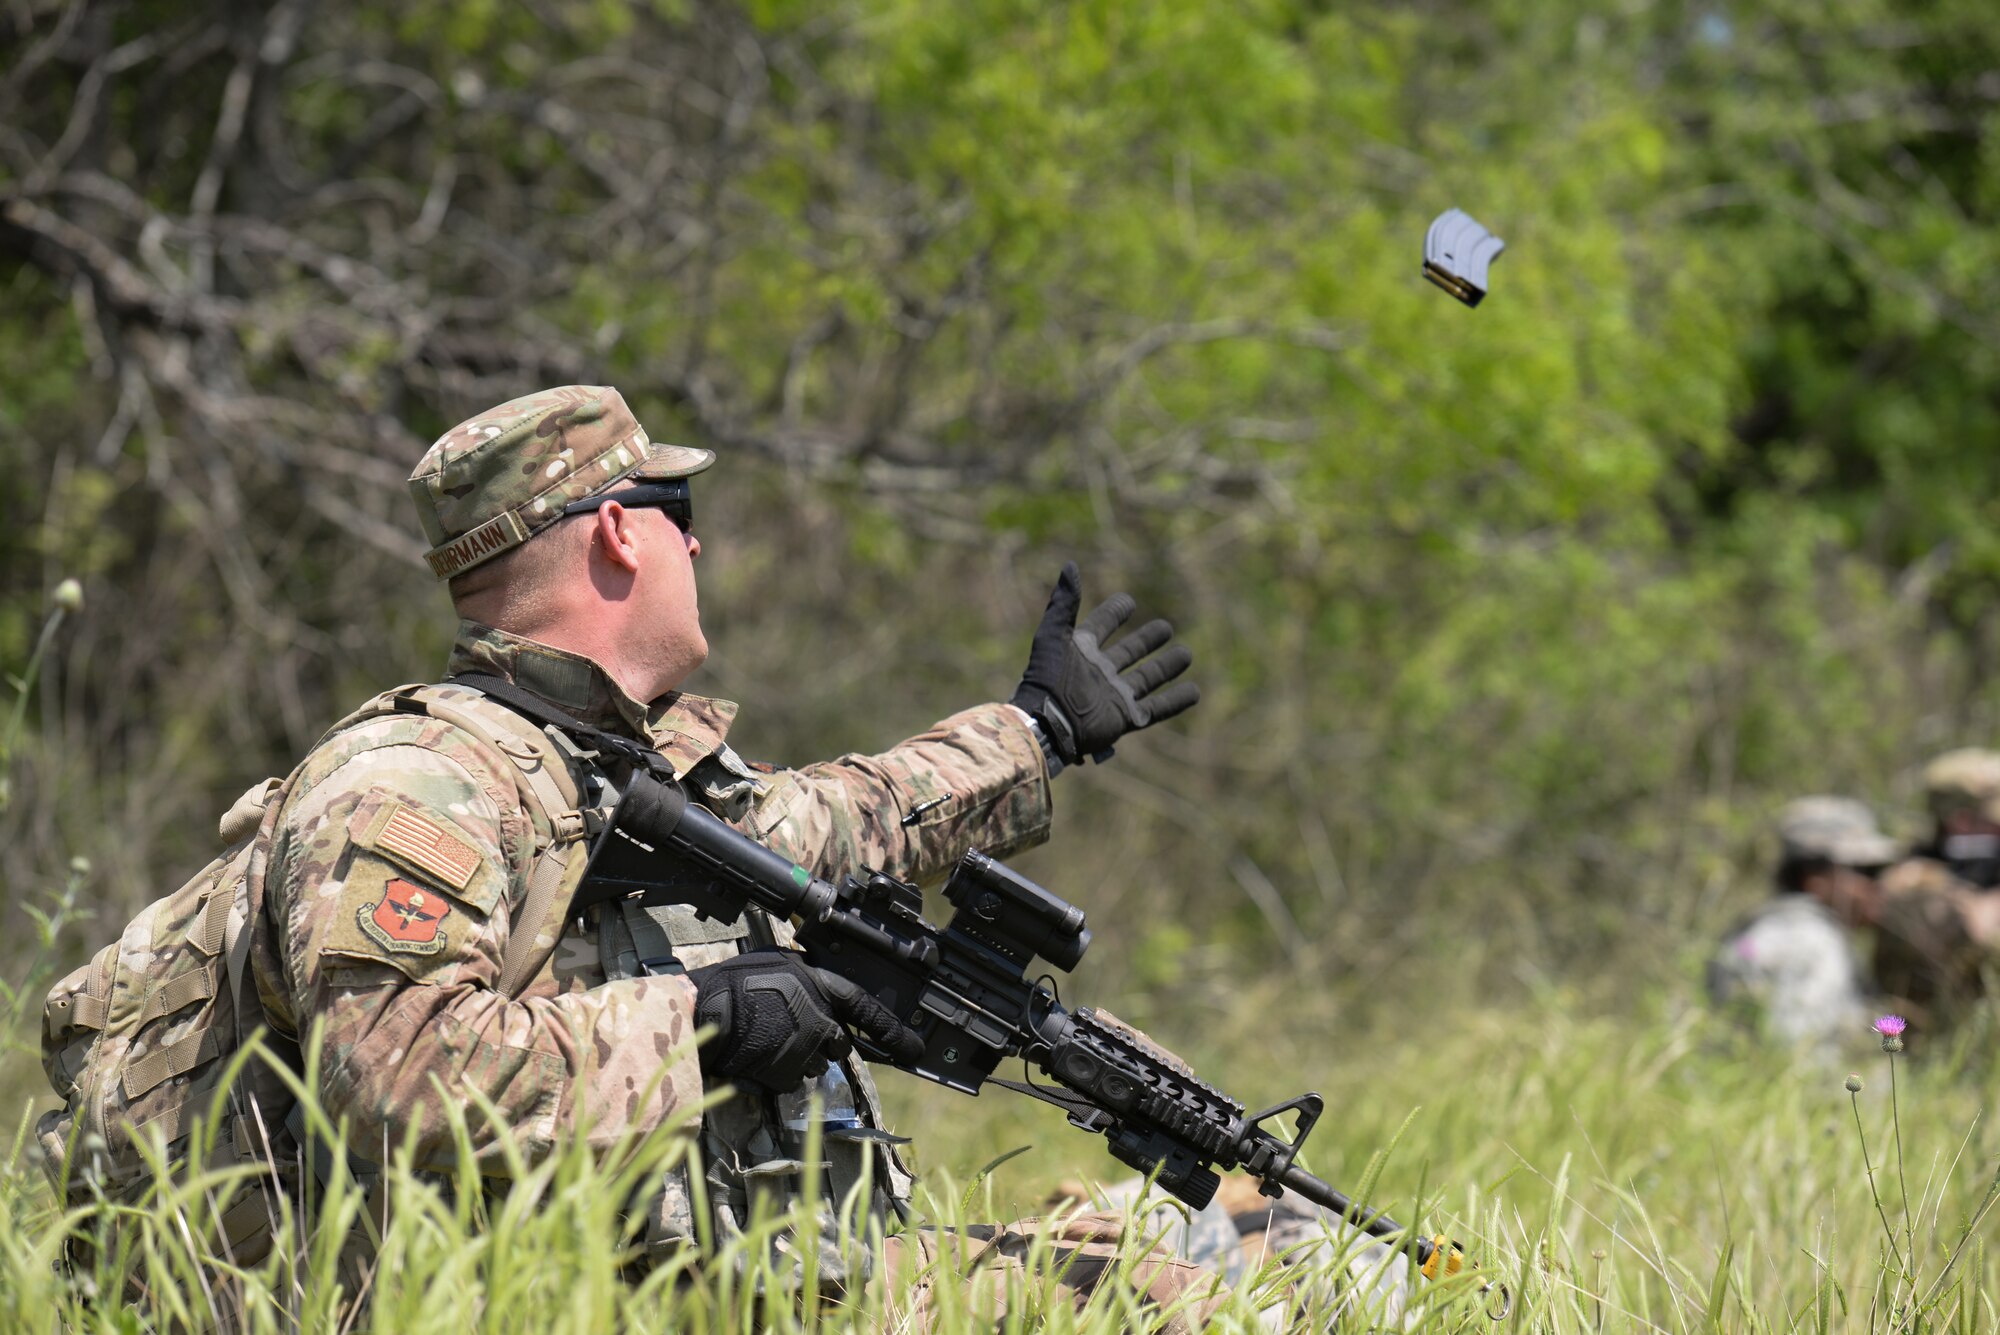 Staff Sgt. Codey Doehrmann, 47th Security Forces Squadron military working dog handler, catches a fresh magazine during an exercise at Laughlin Air Force Base, Texas, April 17, 2019. As the exercise drew near its end, so did many of the ammo pouches Laughlin’s Defenders depended on, but Doehrmann could count on his wingmen. (U.S. Air Force photo by Senior Airman Benjamin N. Valmoja)